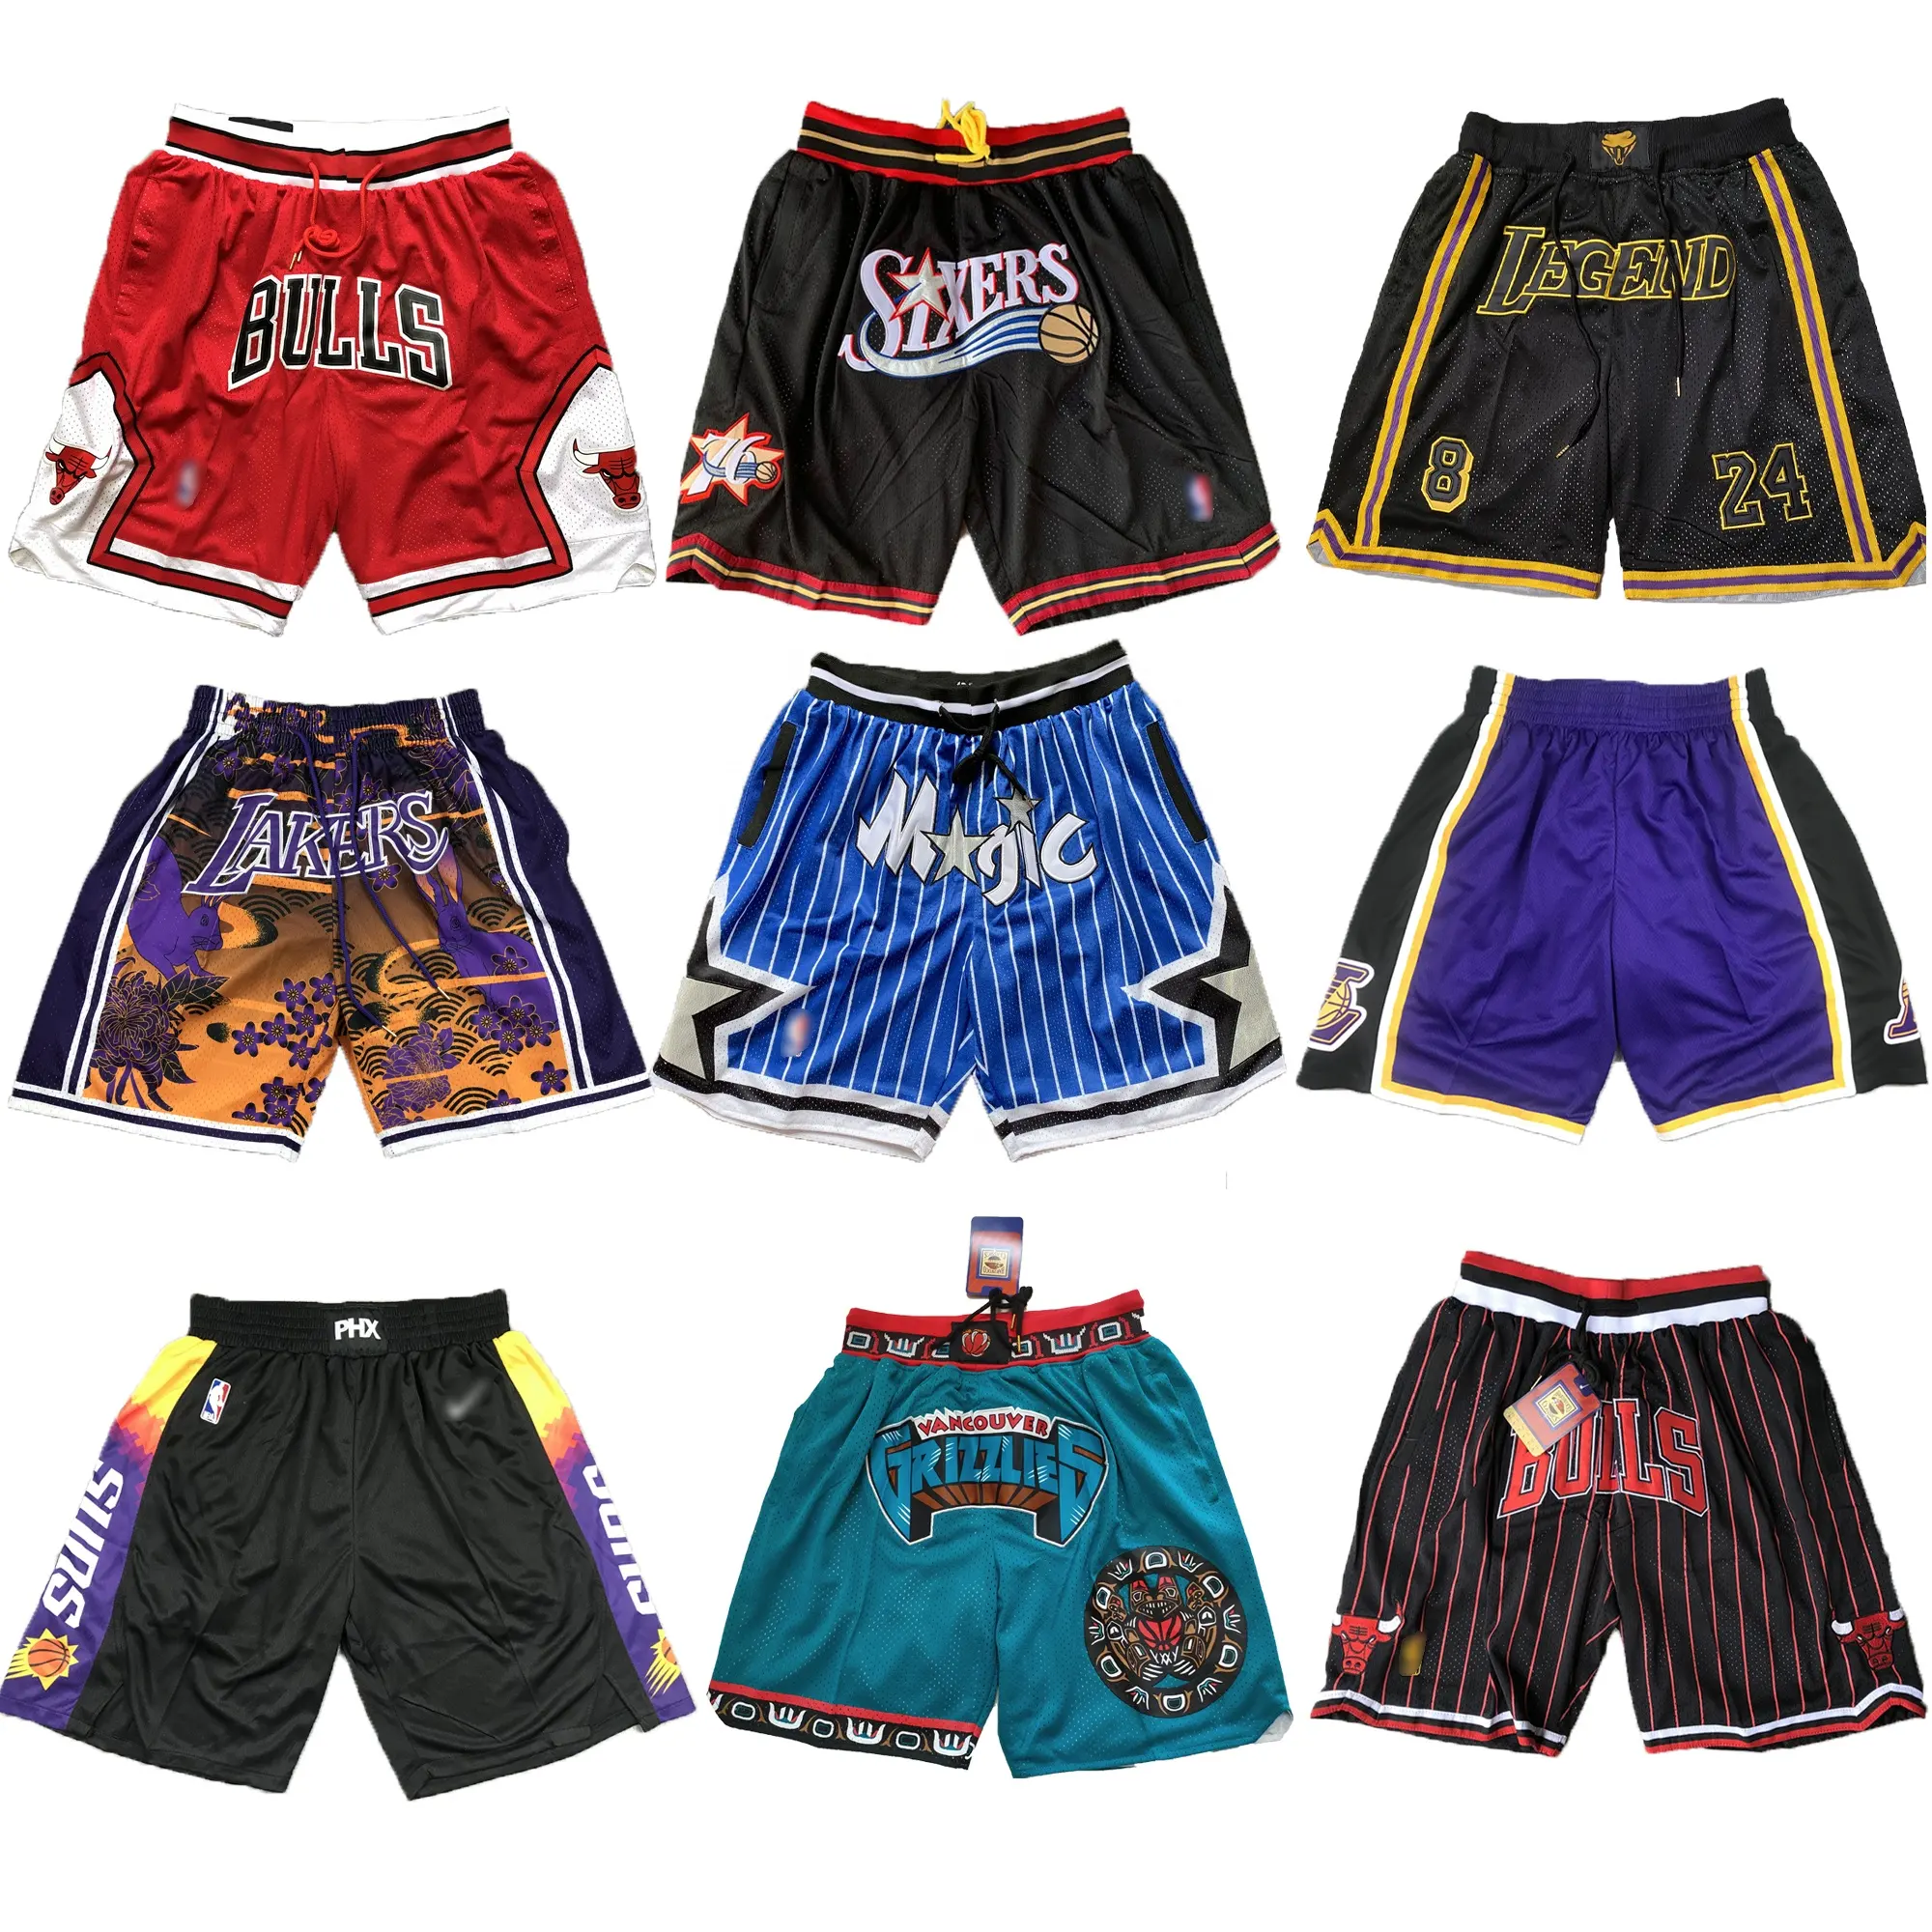 Factory Direct Men's Chicago Shorts Bullll Stitched Red Retro 1995 Basketball Shorts Retro Fully Stitched Shorts